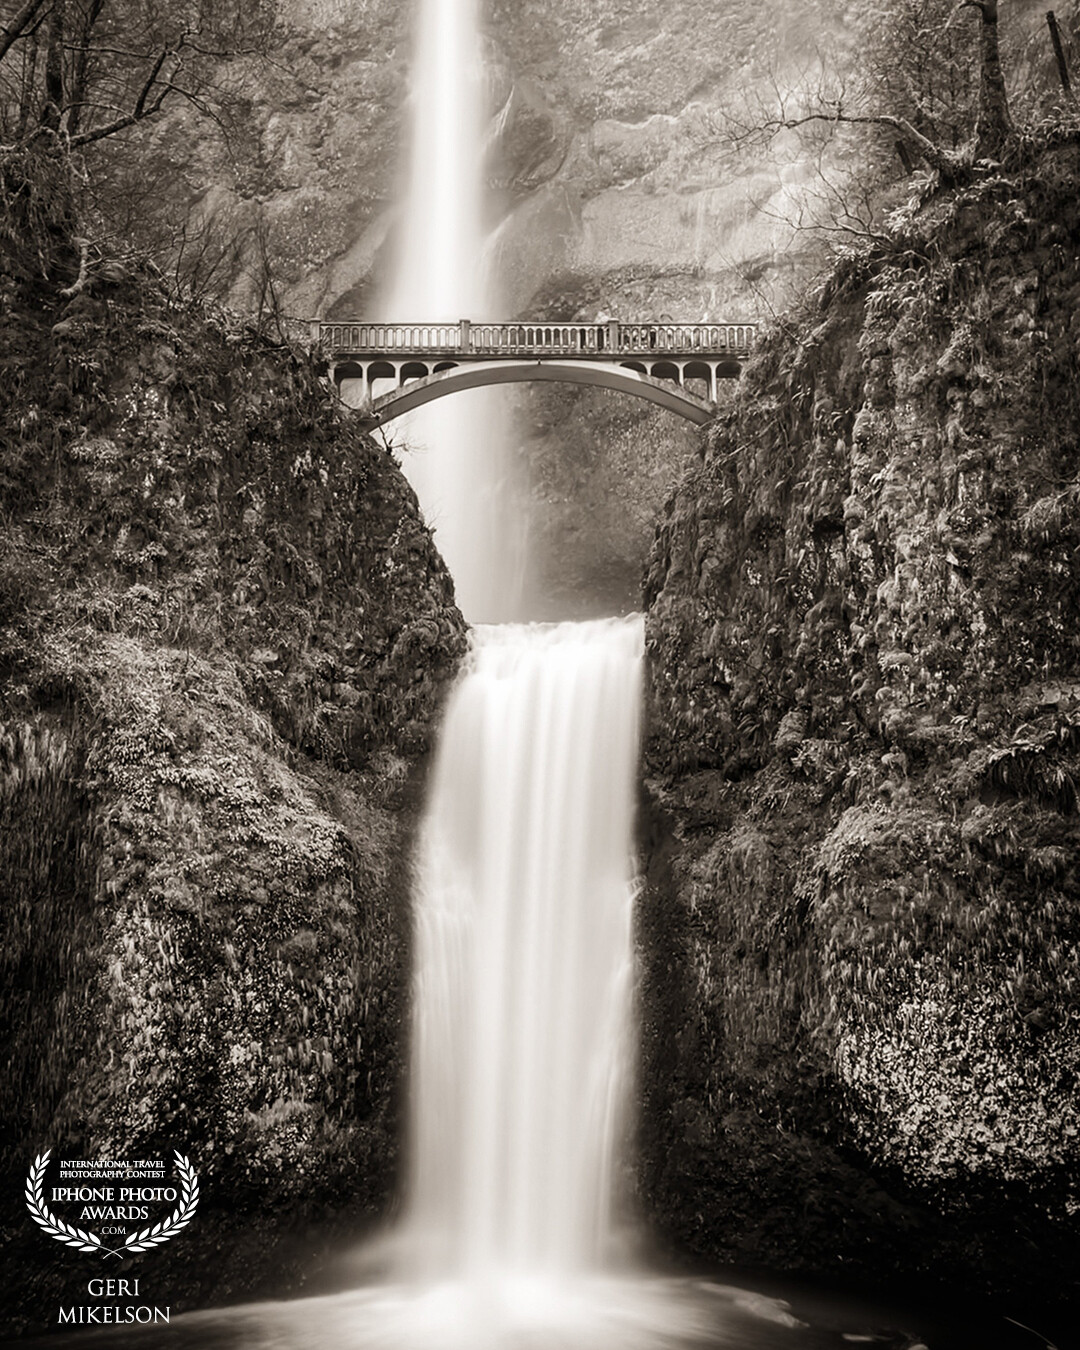 One of my favorite places to photograph is the Columbia River Gorge. This is Multnomah Falls, the tallest waterfall in the state of Oregon. It is listed on the National Register of Historic Places.